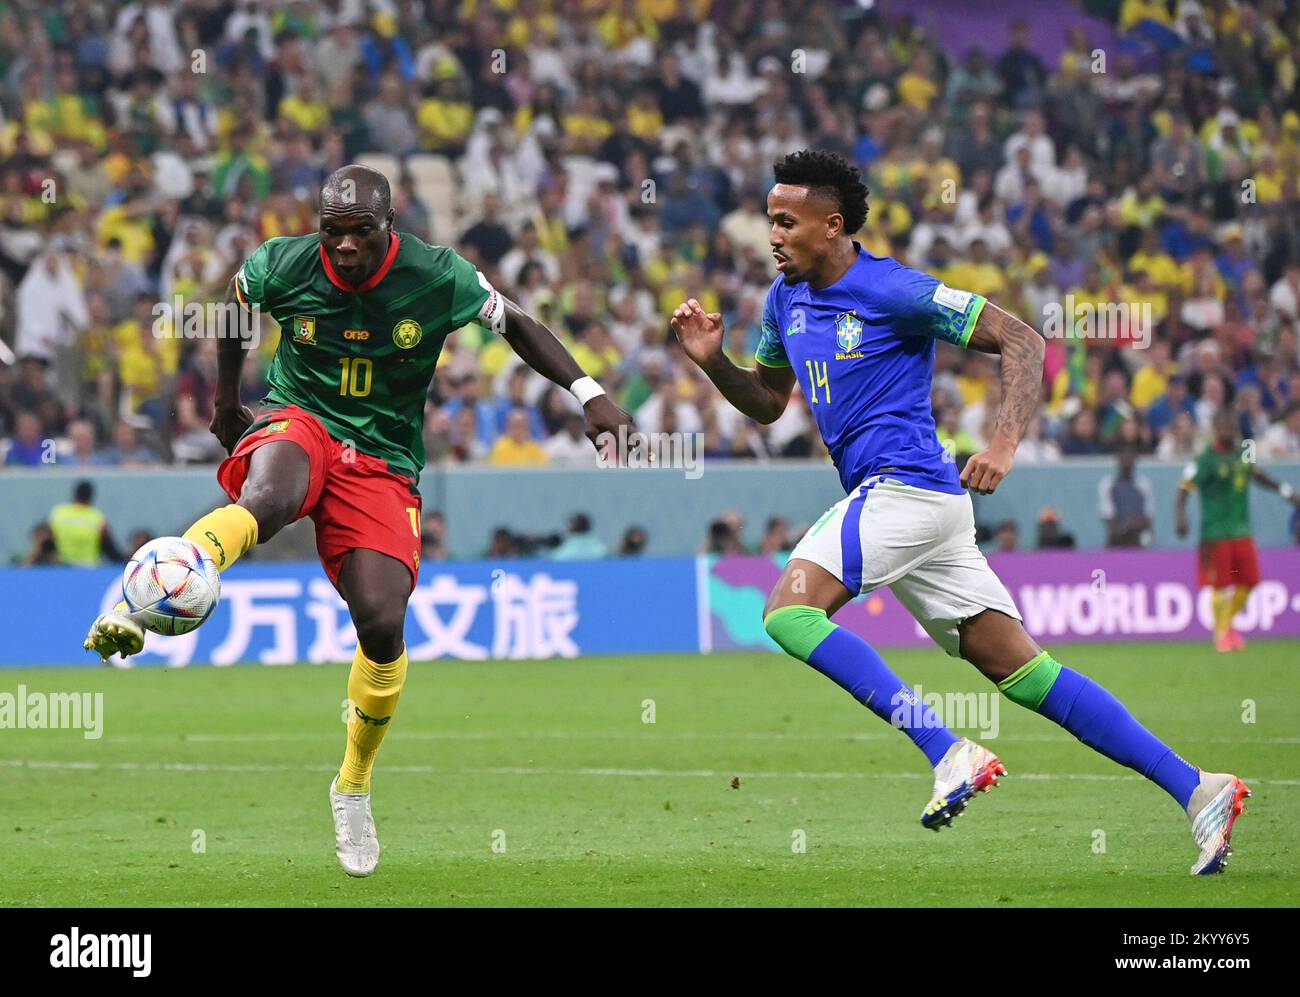 Lusail, Qatar. 2nd Dec, 2022. Vincent Aboubakar of Cameroon vies with Eder Militao of Brazil during their Group G match at the 2022 FIFA World Cup at Lusail Stadium in Lusail, Qatar, Dec. 2, 2022. Credit: Chen Cheng/Xinhua/Alamy Live News Stock Photo